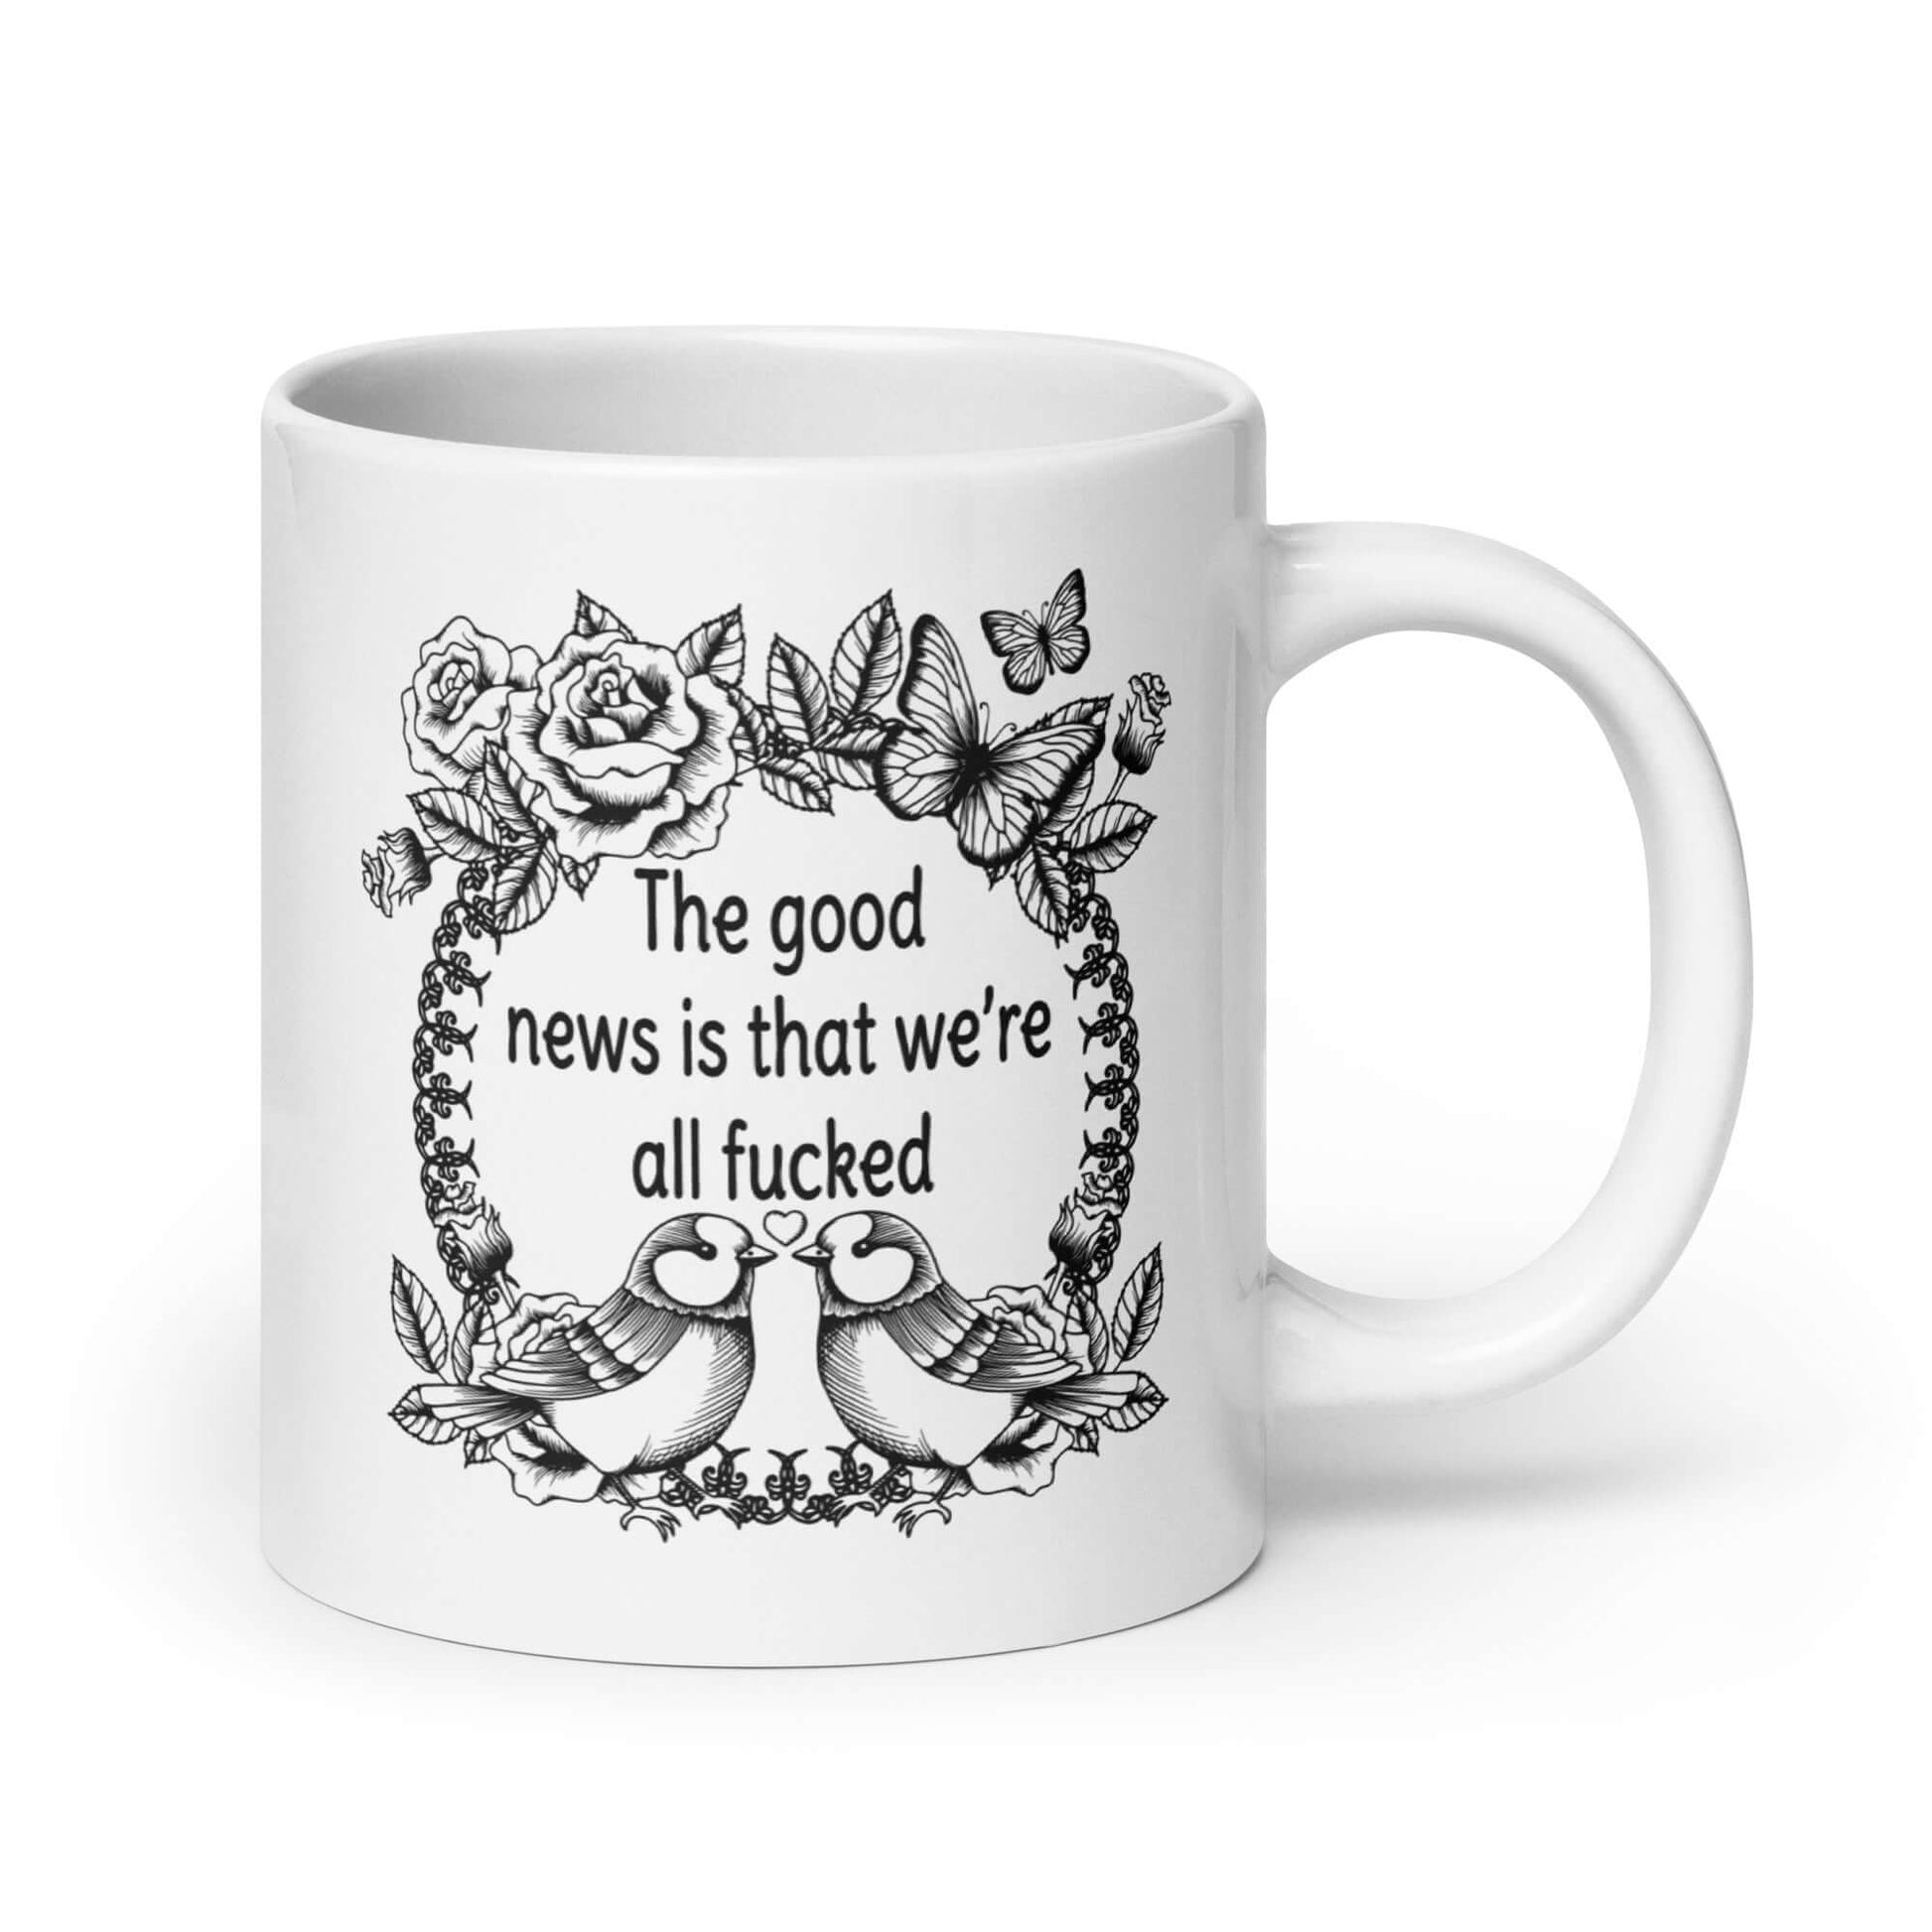 White ceramic coffee mug that has an image of a line drawing wreath with butterflies, sparrows and roses. The phrase The good news is that we're all fucked is printed inside of the wreath. The graphics are on both sides of the mug.